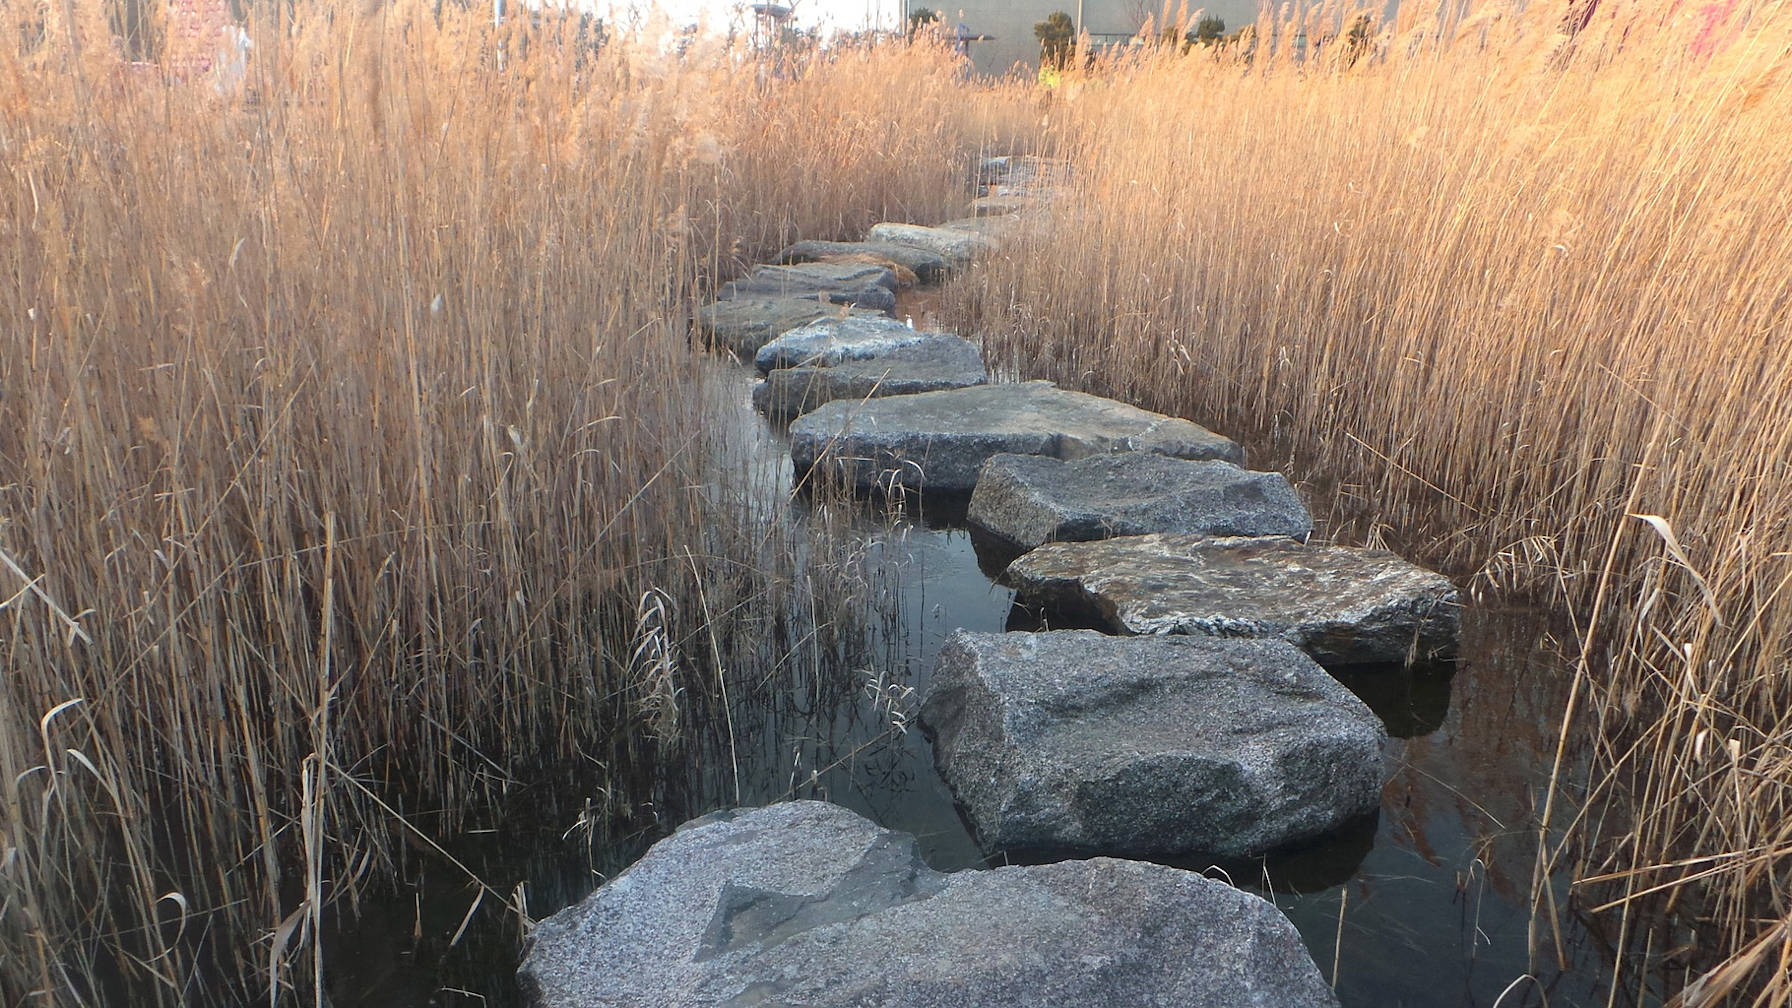 Decorative image of stepping stones between reeds.